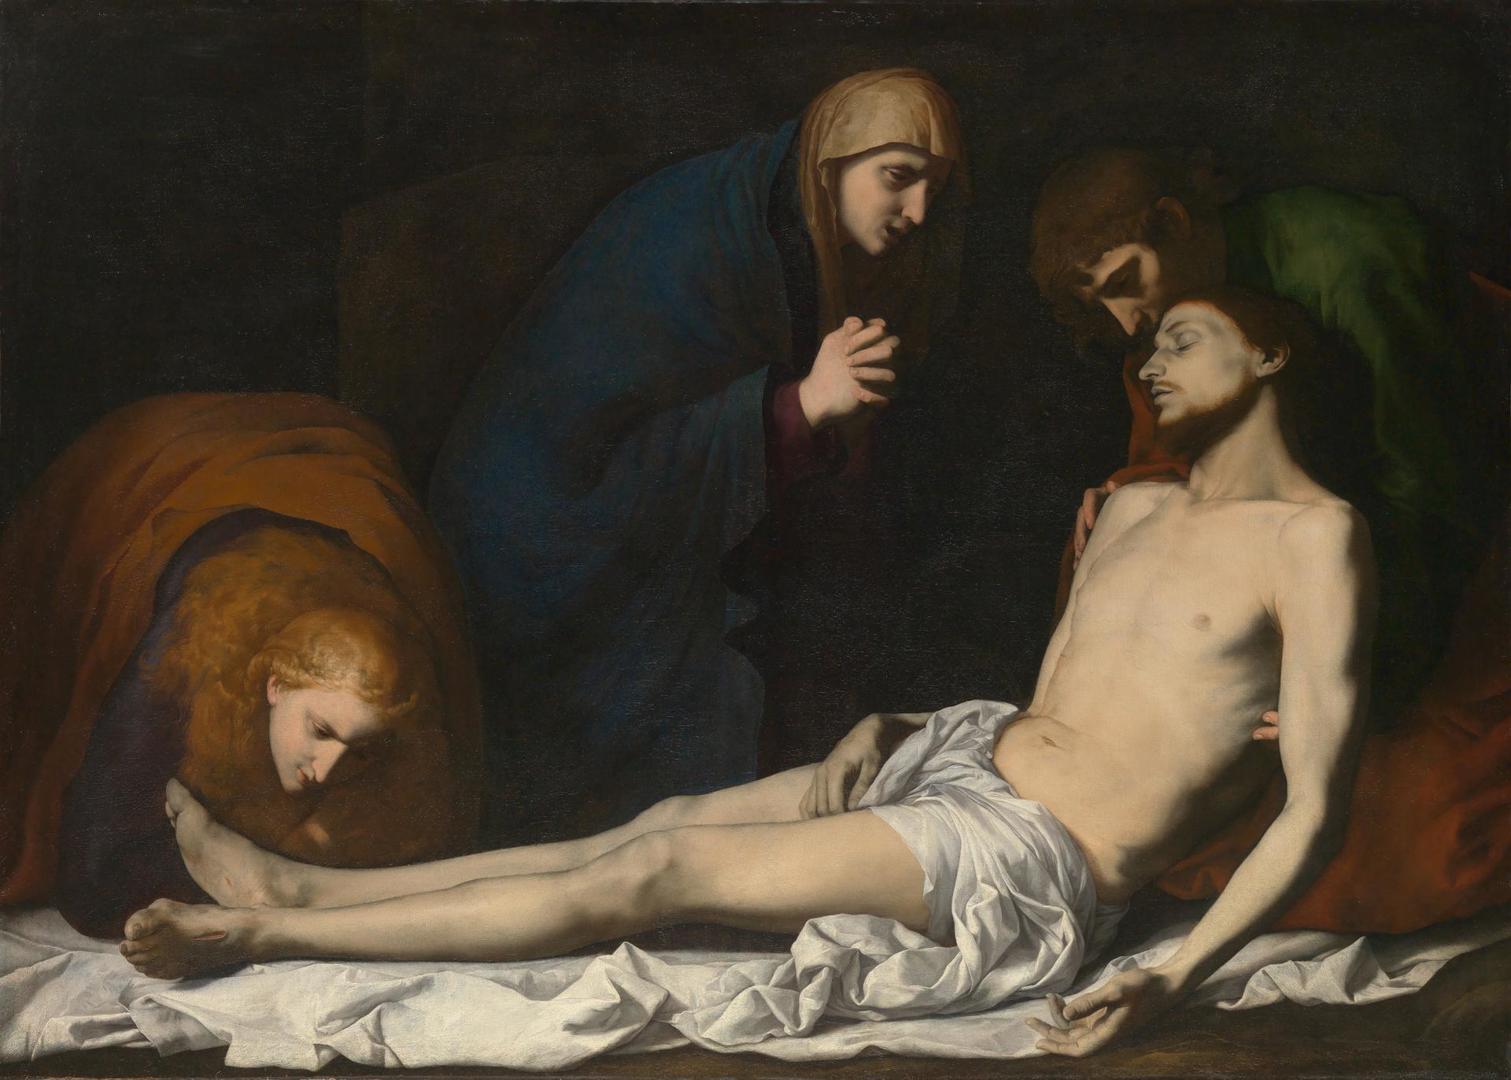 The Lamentation over the Dead Christ by Jusepe de Ribera